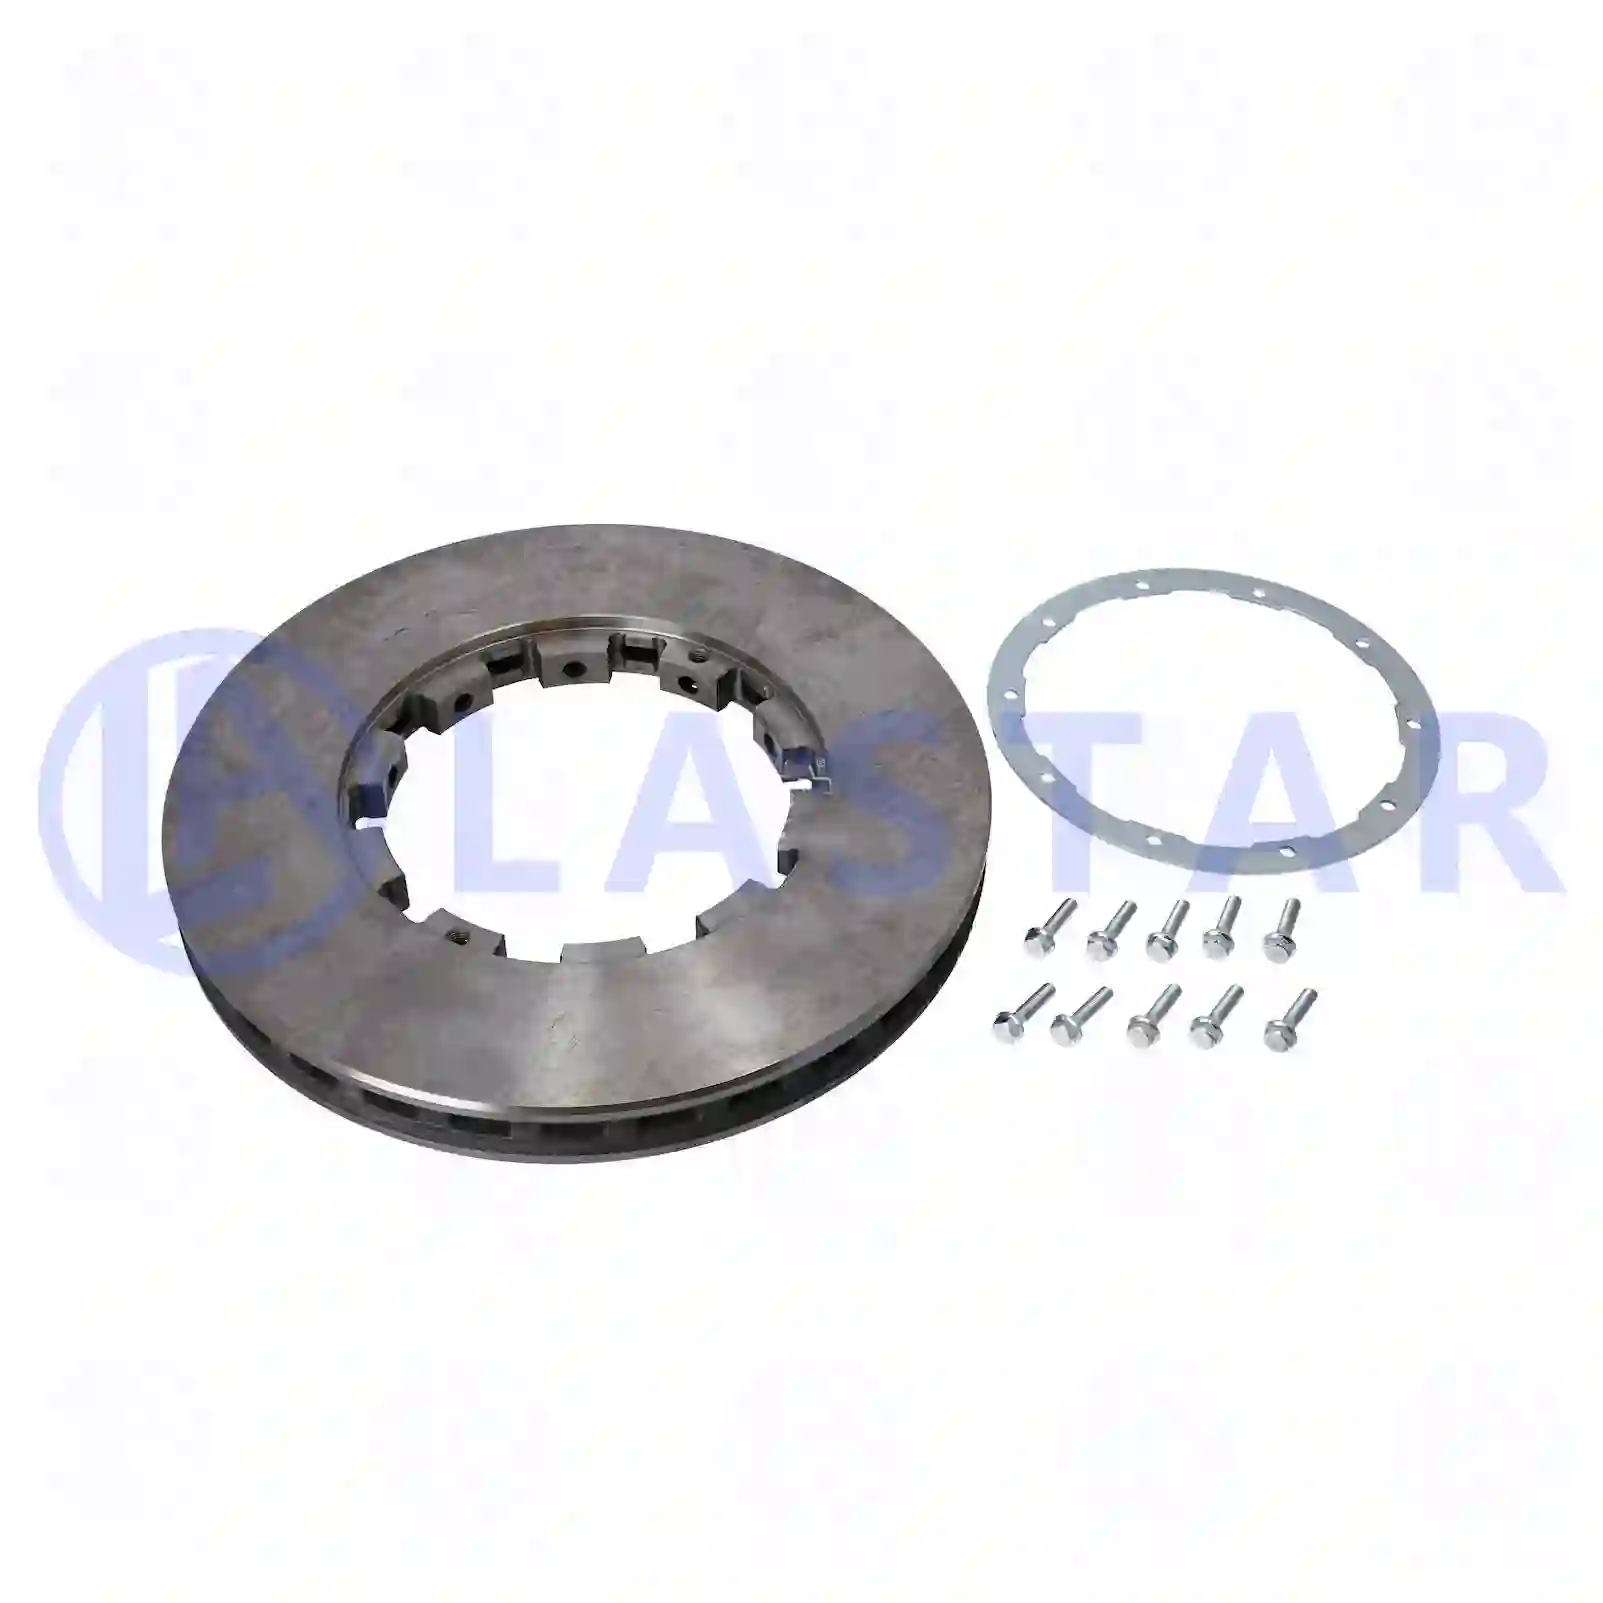 Brake disc, with accessory kit, 77715903, 1387439, 1640561, 1726138, 1739542, 1783346, 1812563, 1812582 ||  77715903 Lastar Spare Part | Truck Spare Parts, Auotomotive Spare Parts Brake disc, with accessory kit, 77715903, 1387439, 1640561, 1726138, 1739542, 1783346, 1812563, 1812582 ||  77715903 Lastar Spare Part | Truck Spare Parts, Auotomotive Spare Parts